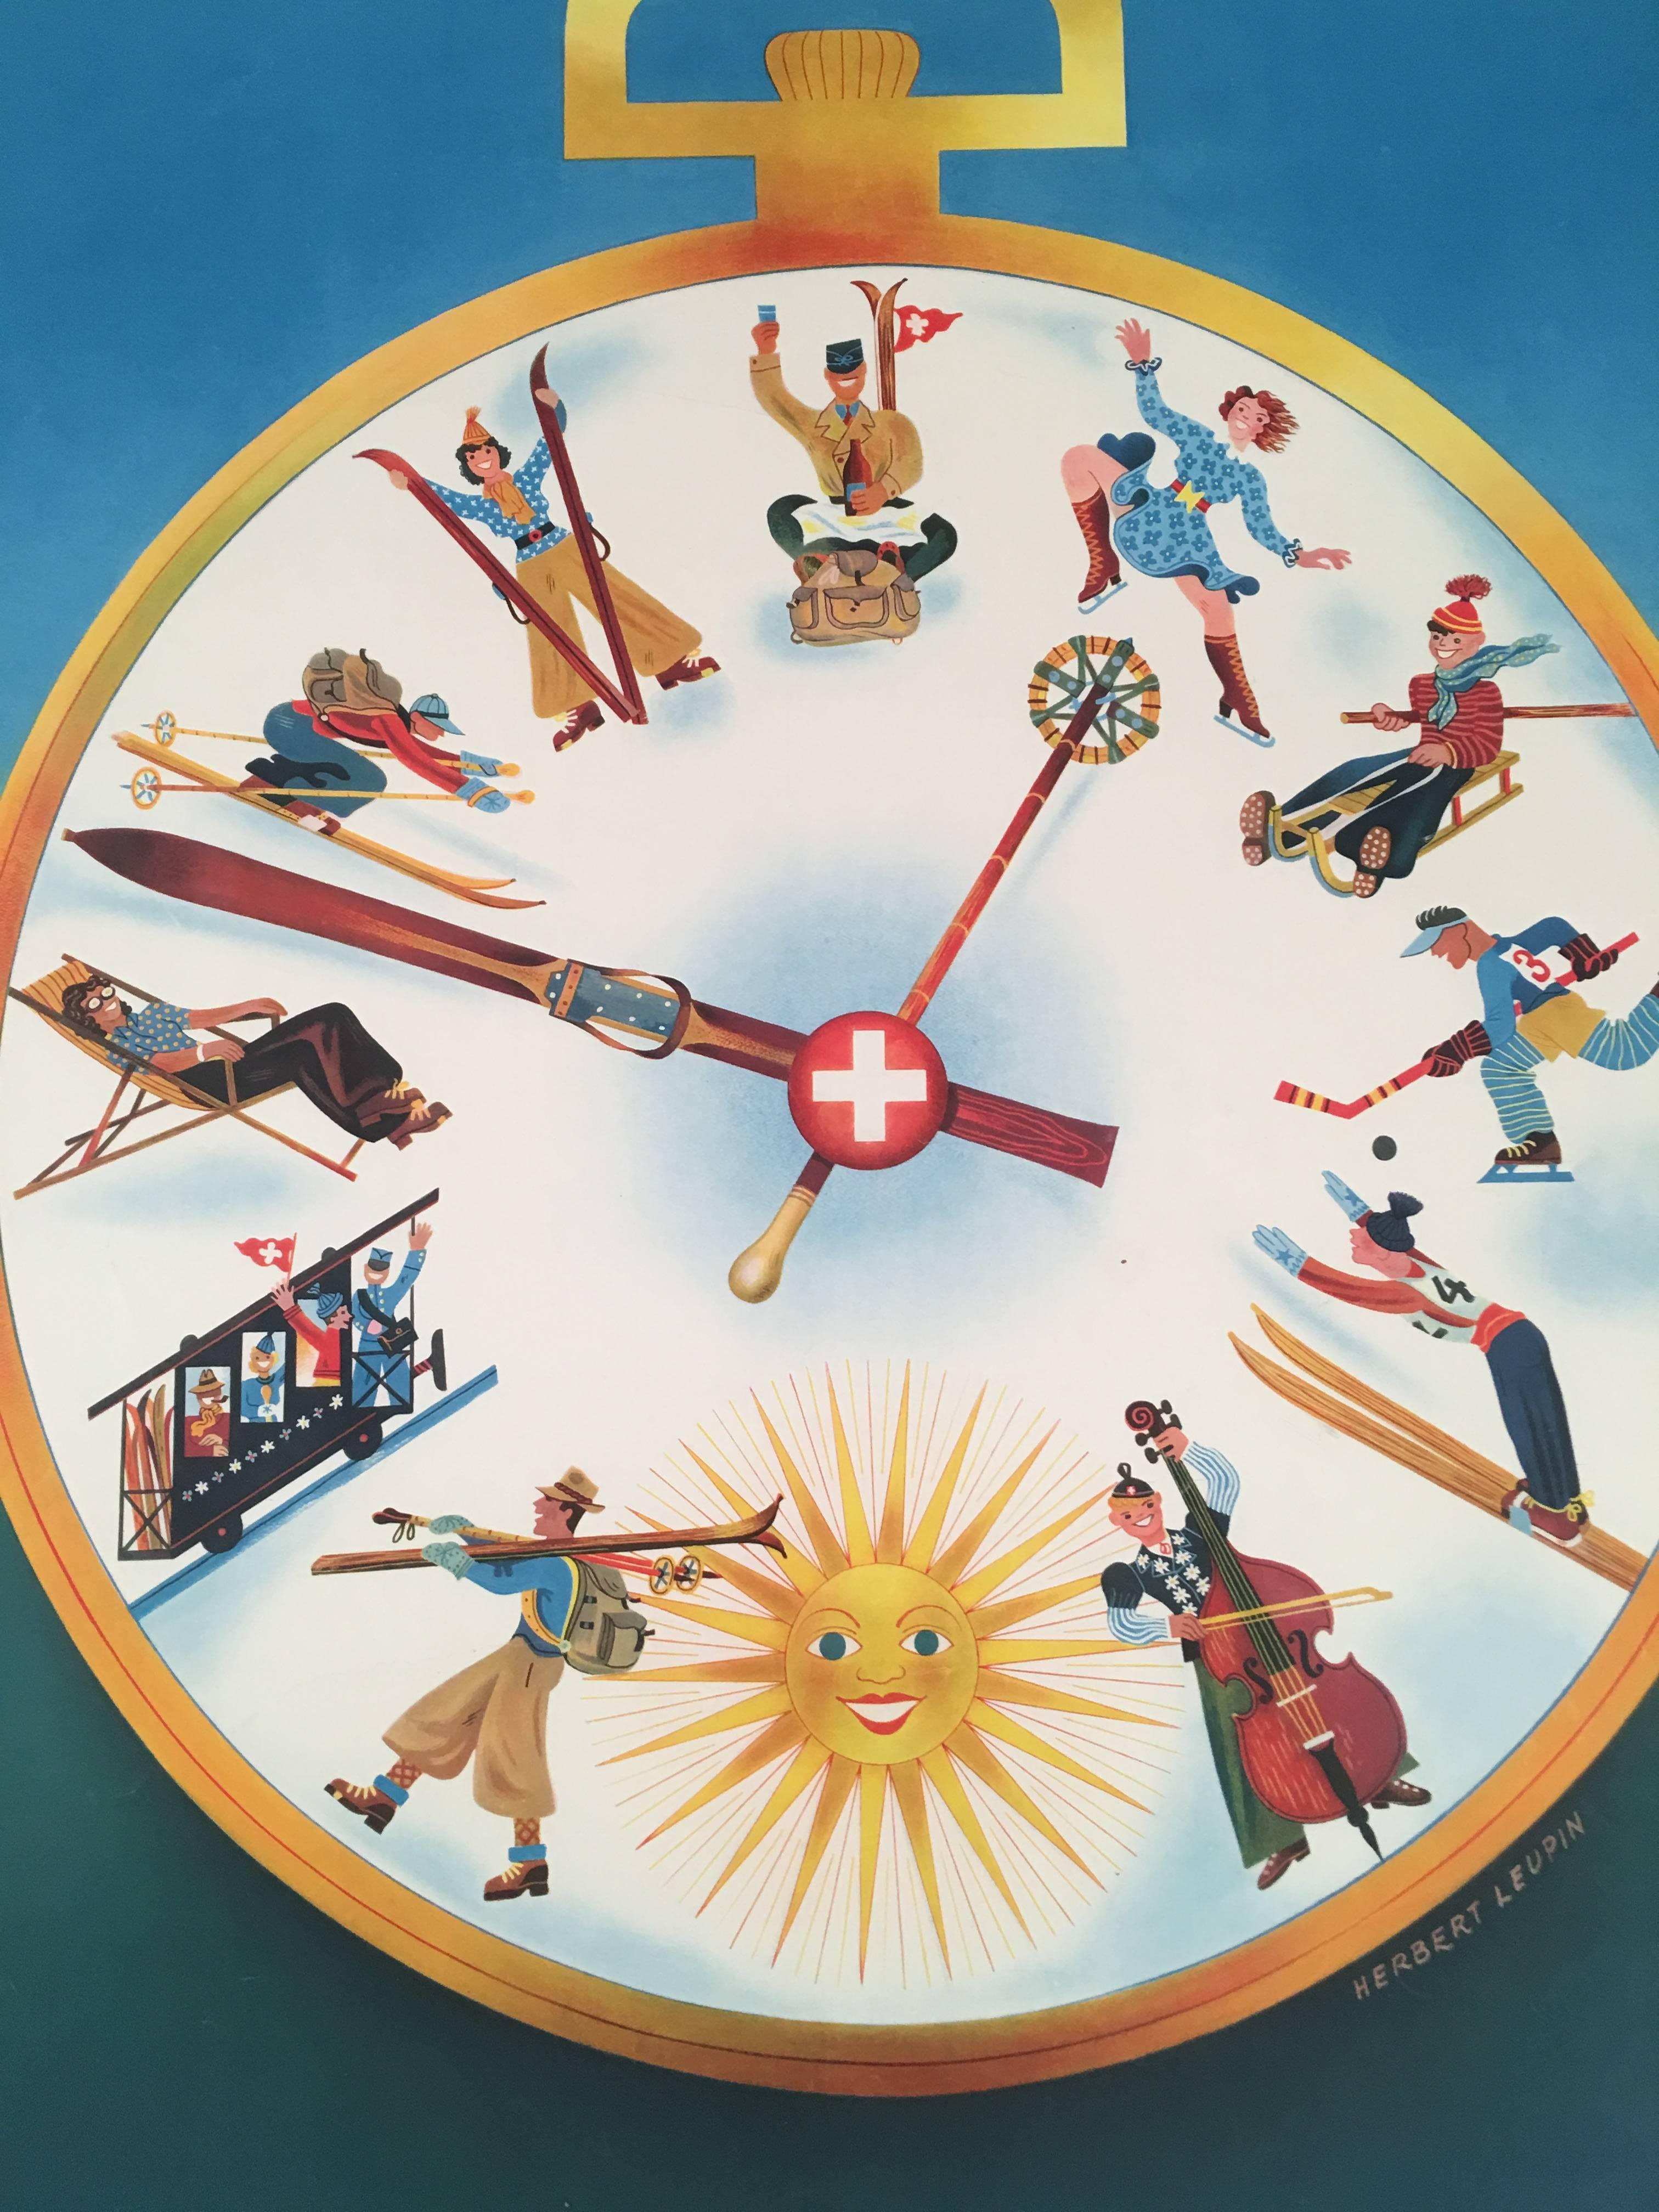 An original lithograph Swiss travel poster by graphic designer Herbert Leupin (Swiss, 1916-1999) entitled, in French, L'heure des sports d'hiver en Suisse (Time for Winter Sports in Switzerland), depicting a large pocket watch with a Swiss cross or